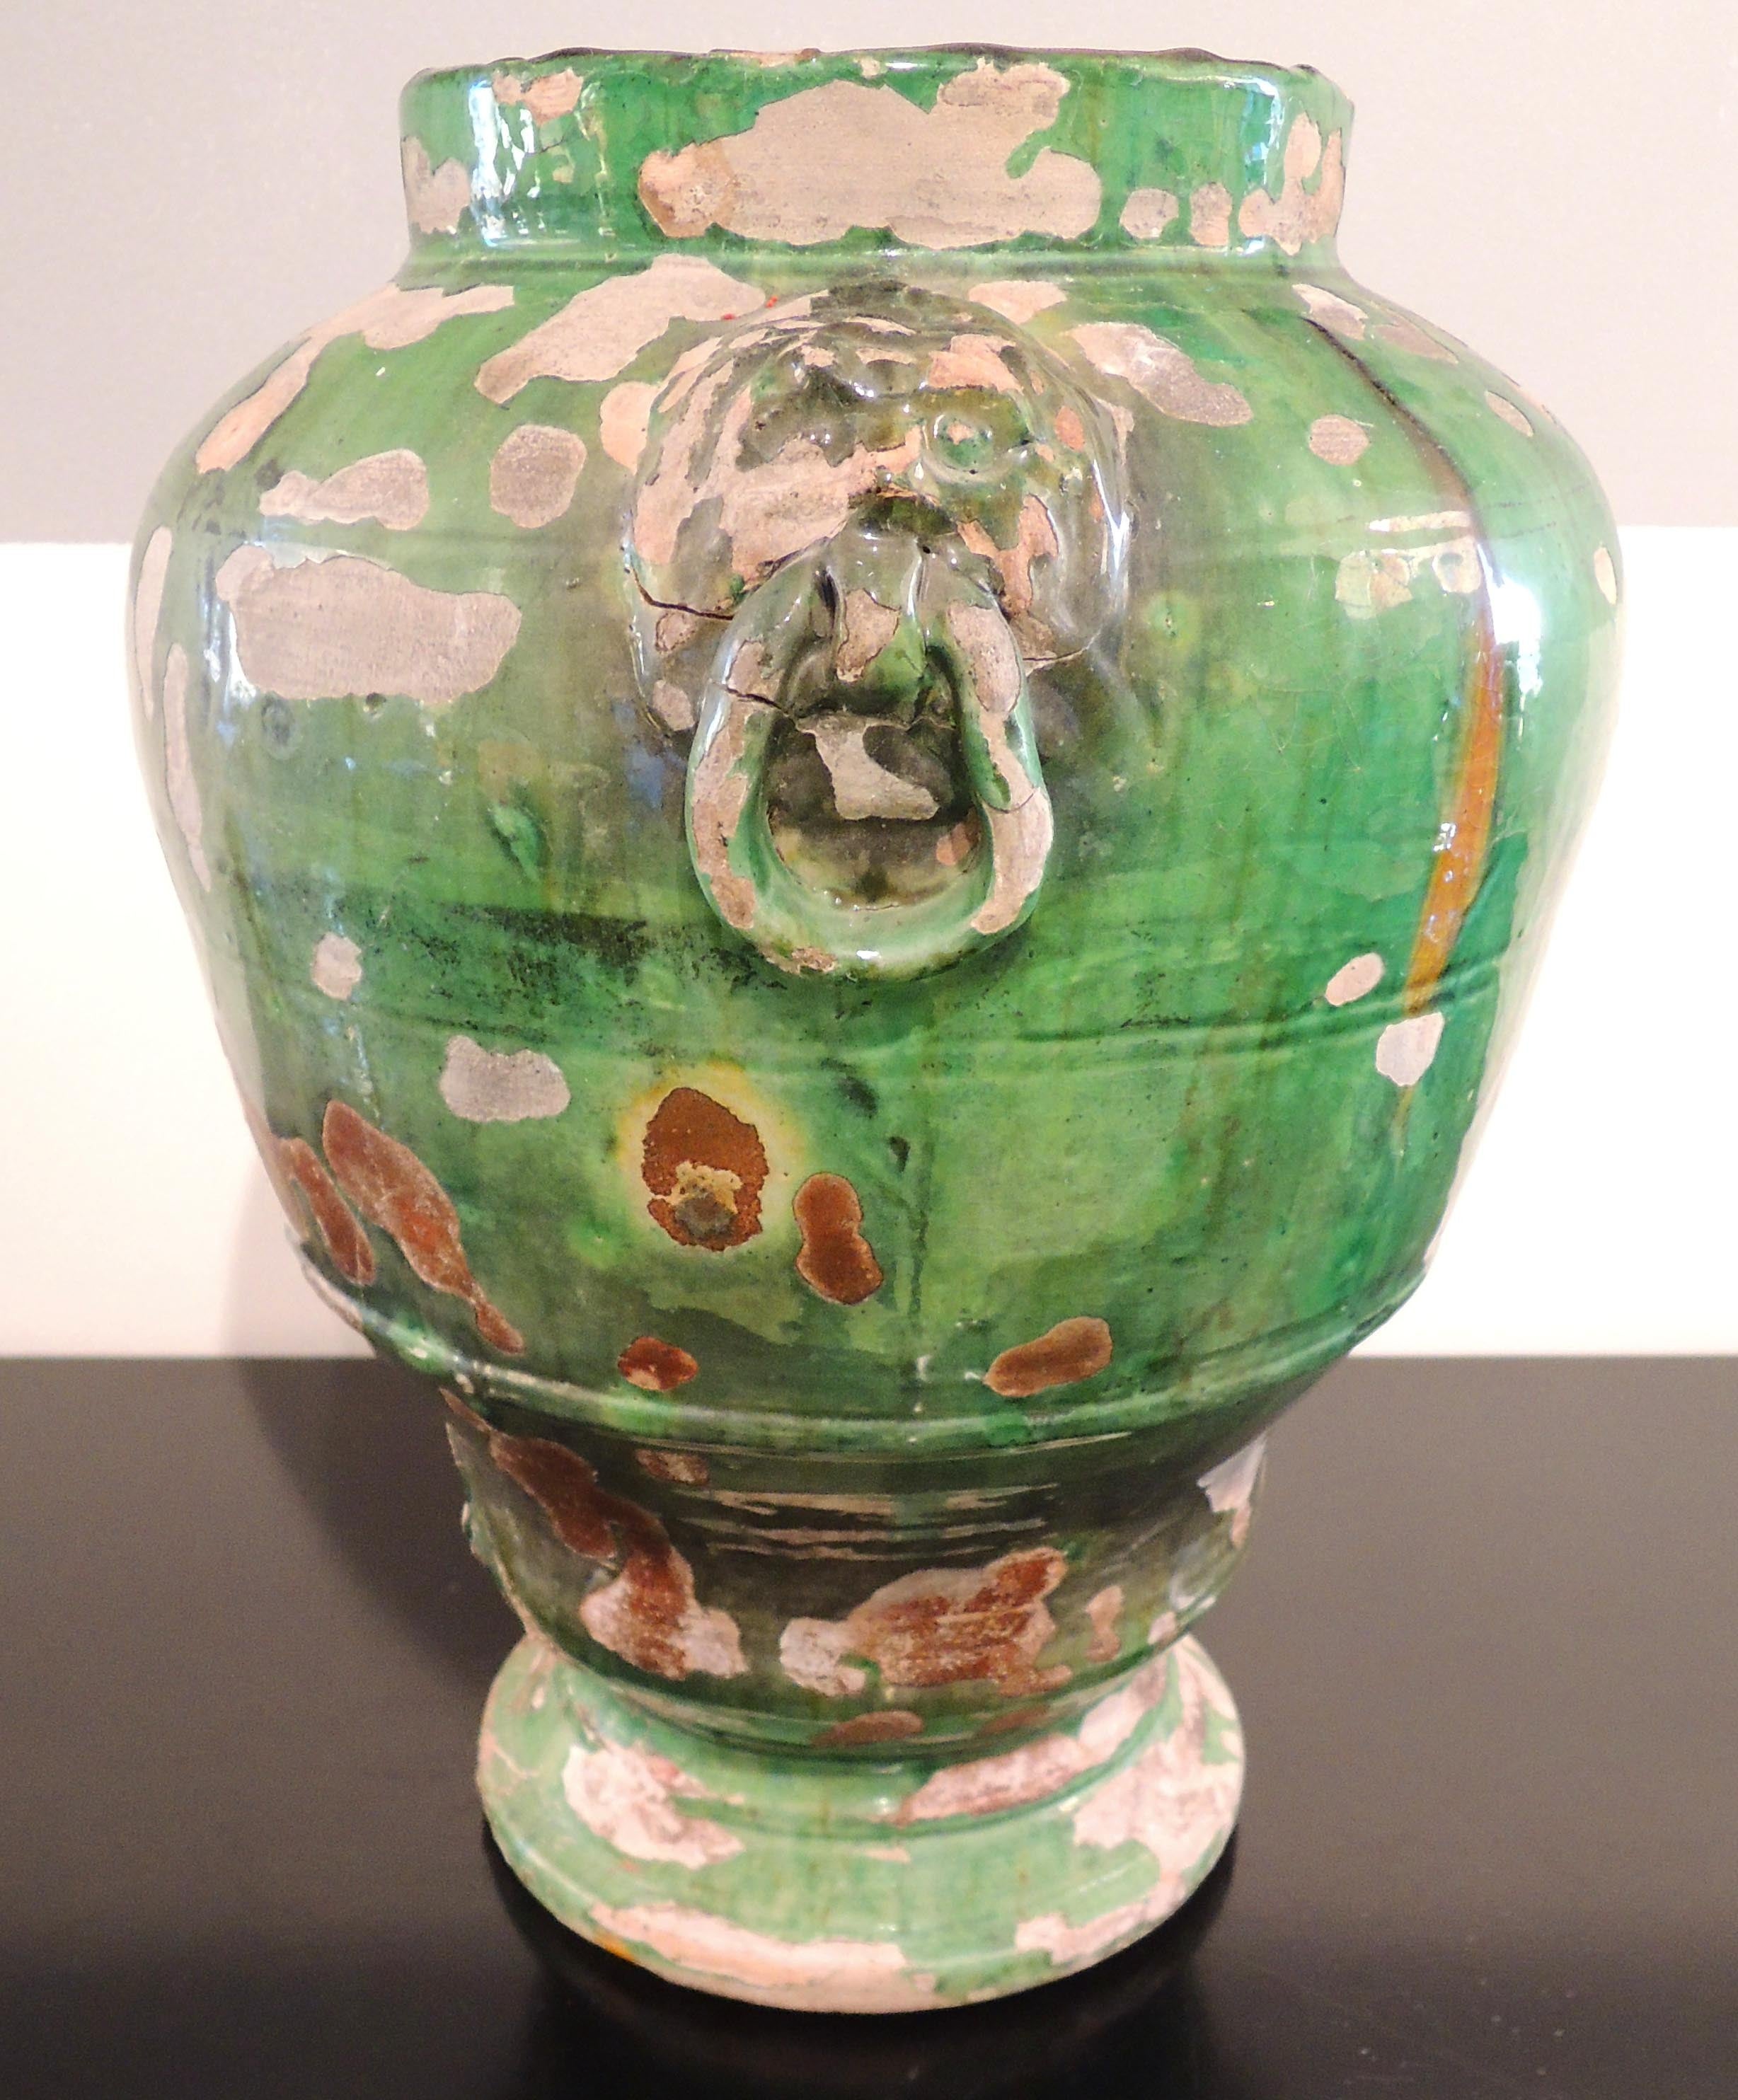 18th C. vase from Anduze, France